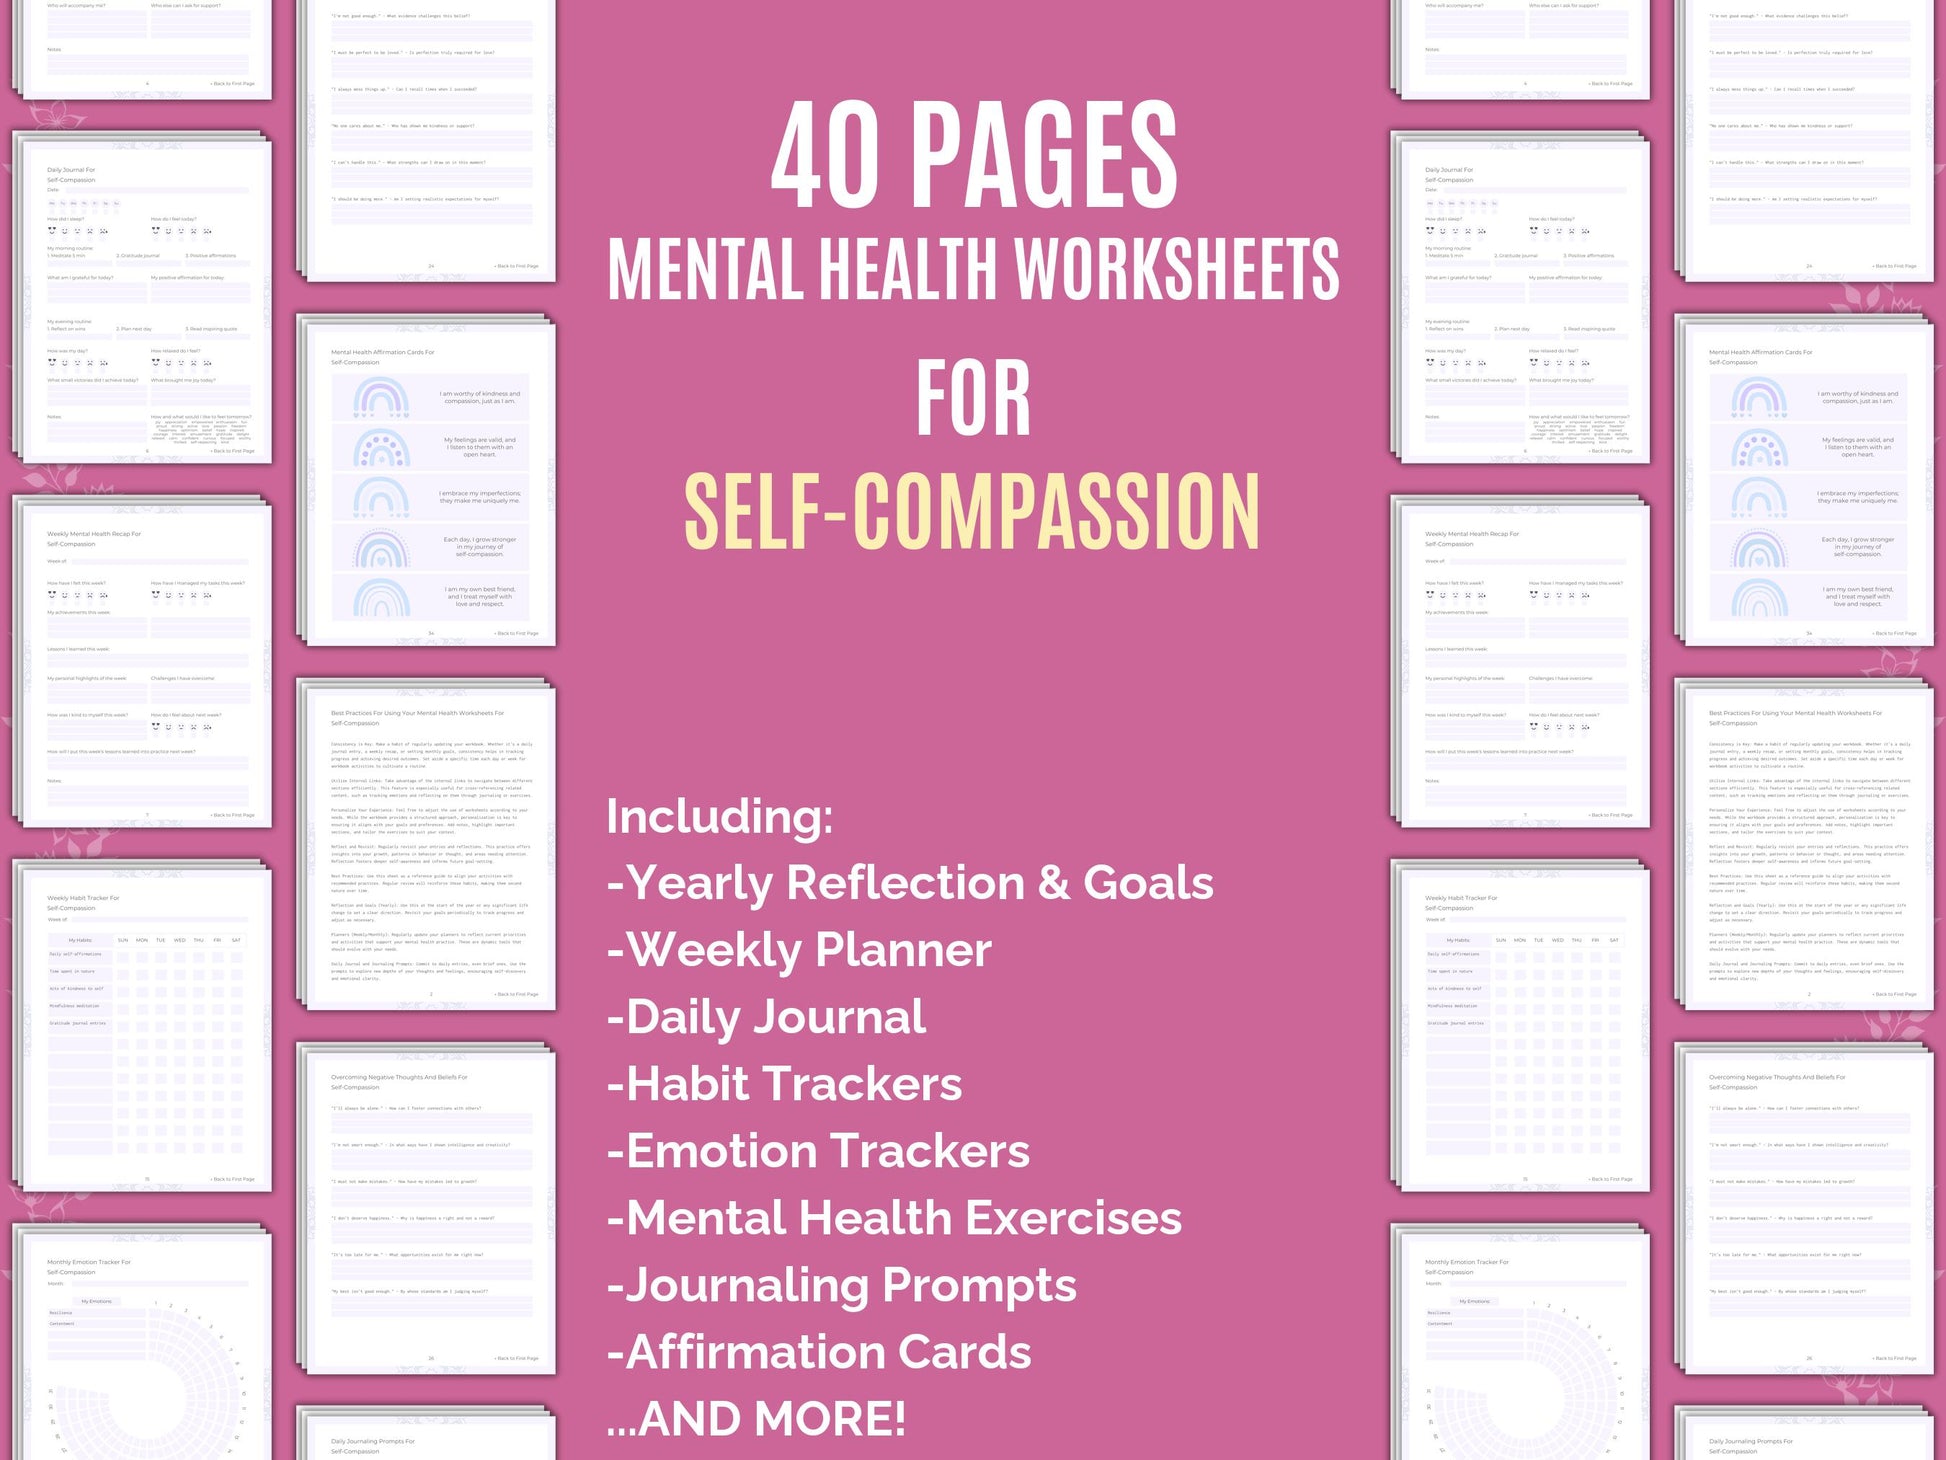 Templates, Goal Setting, Cheat Sheet, Self-Compassion Mental Health, Journals, Notes, Therapy, Resources, Workbooks, Journaling, Counseling, Tools, Planners